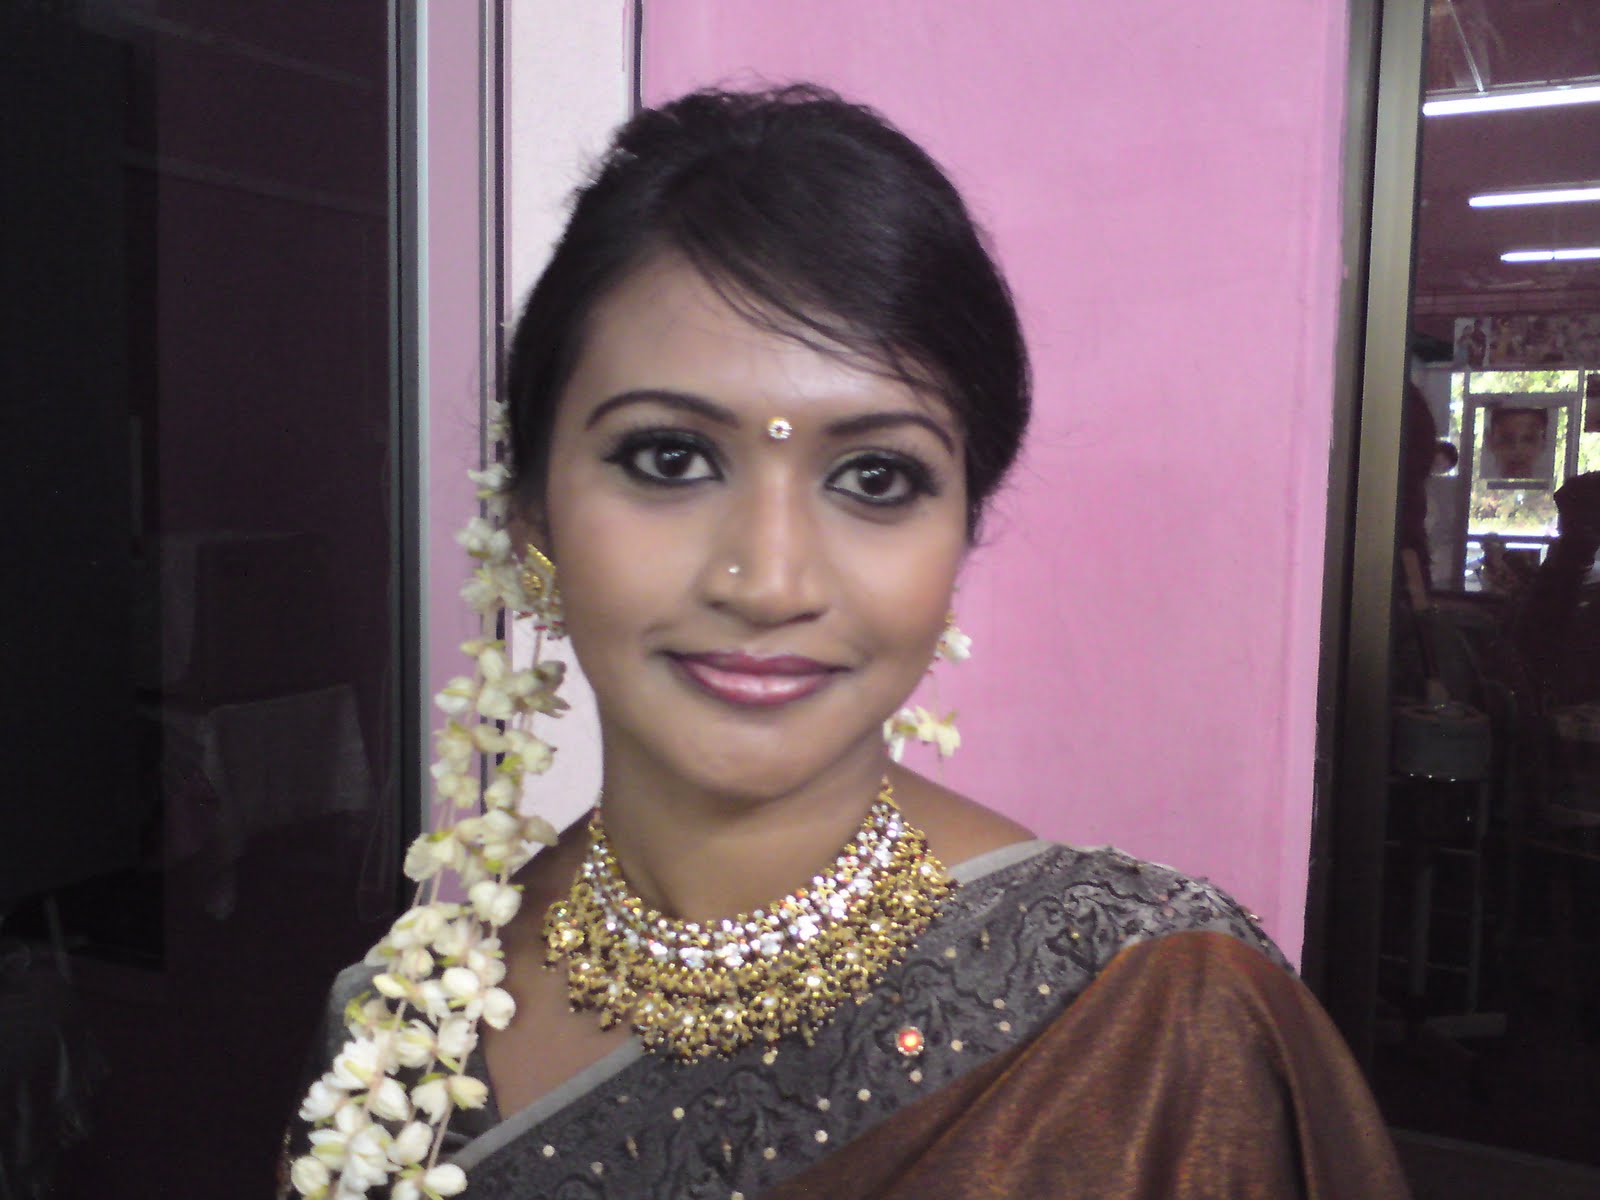 Long Haircuts For Women 2013 Simple Tamil Bridal Plait Hairstyle With Jasmine Flowers